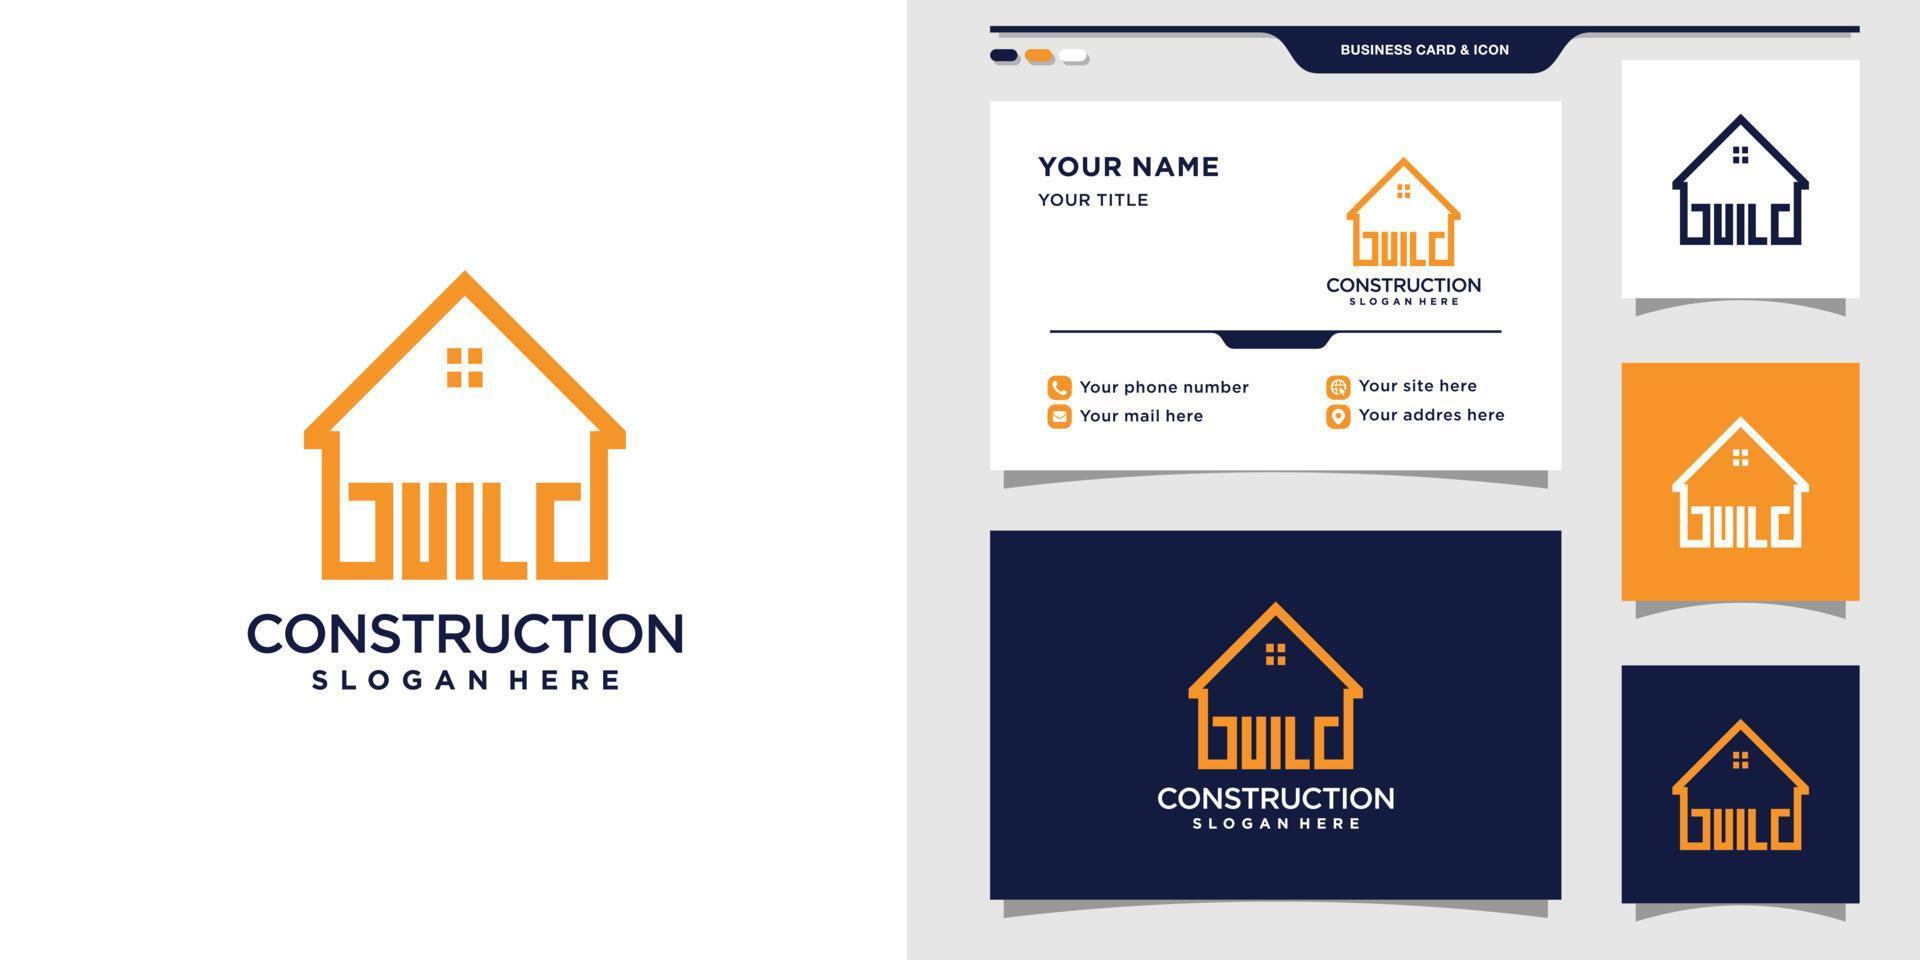 Construction logo template with creative concept and business card design Premium Vector